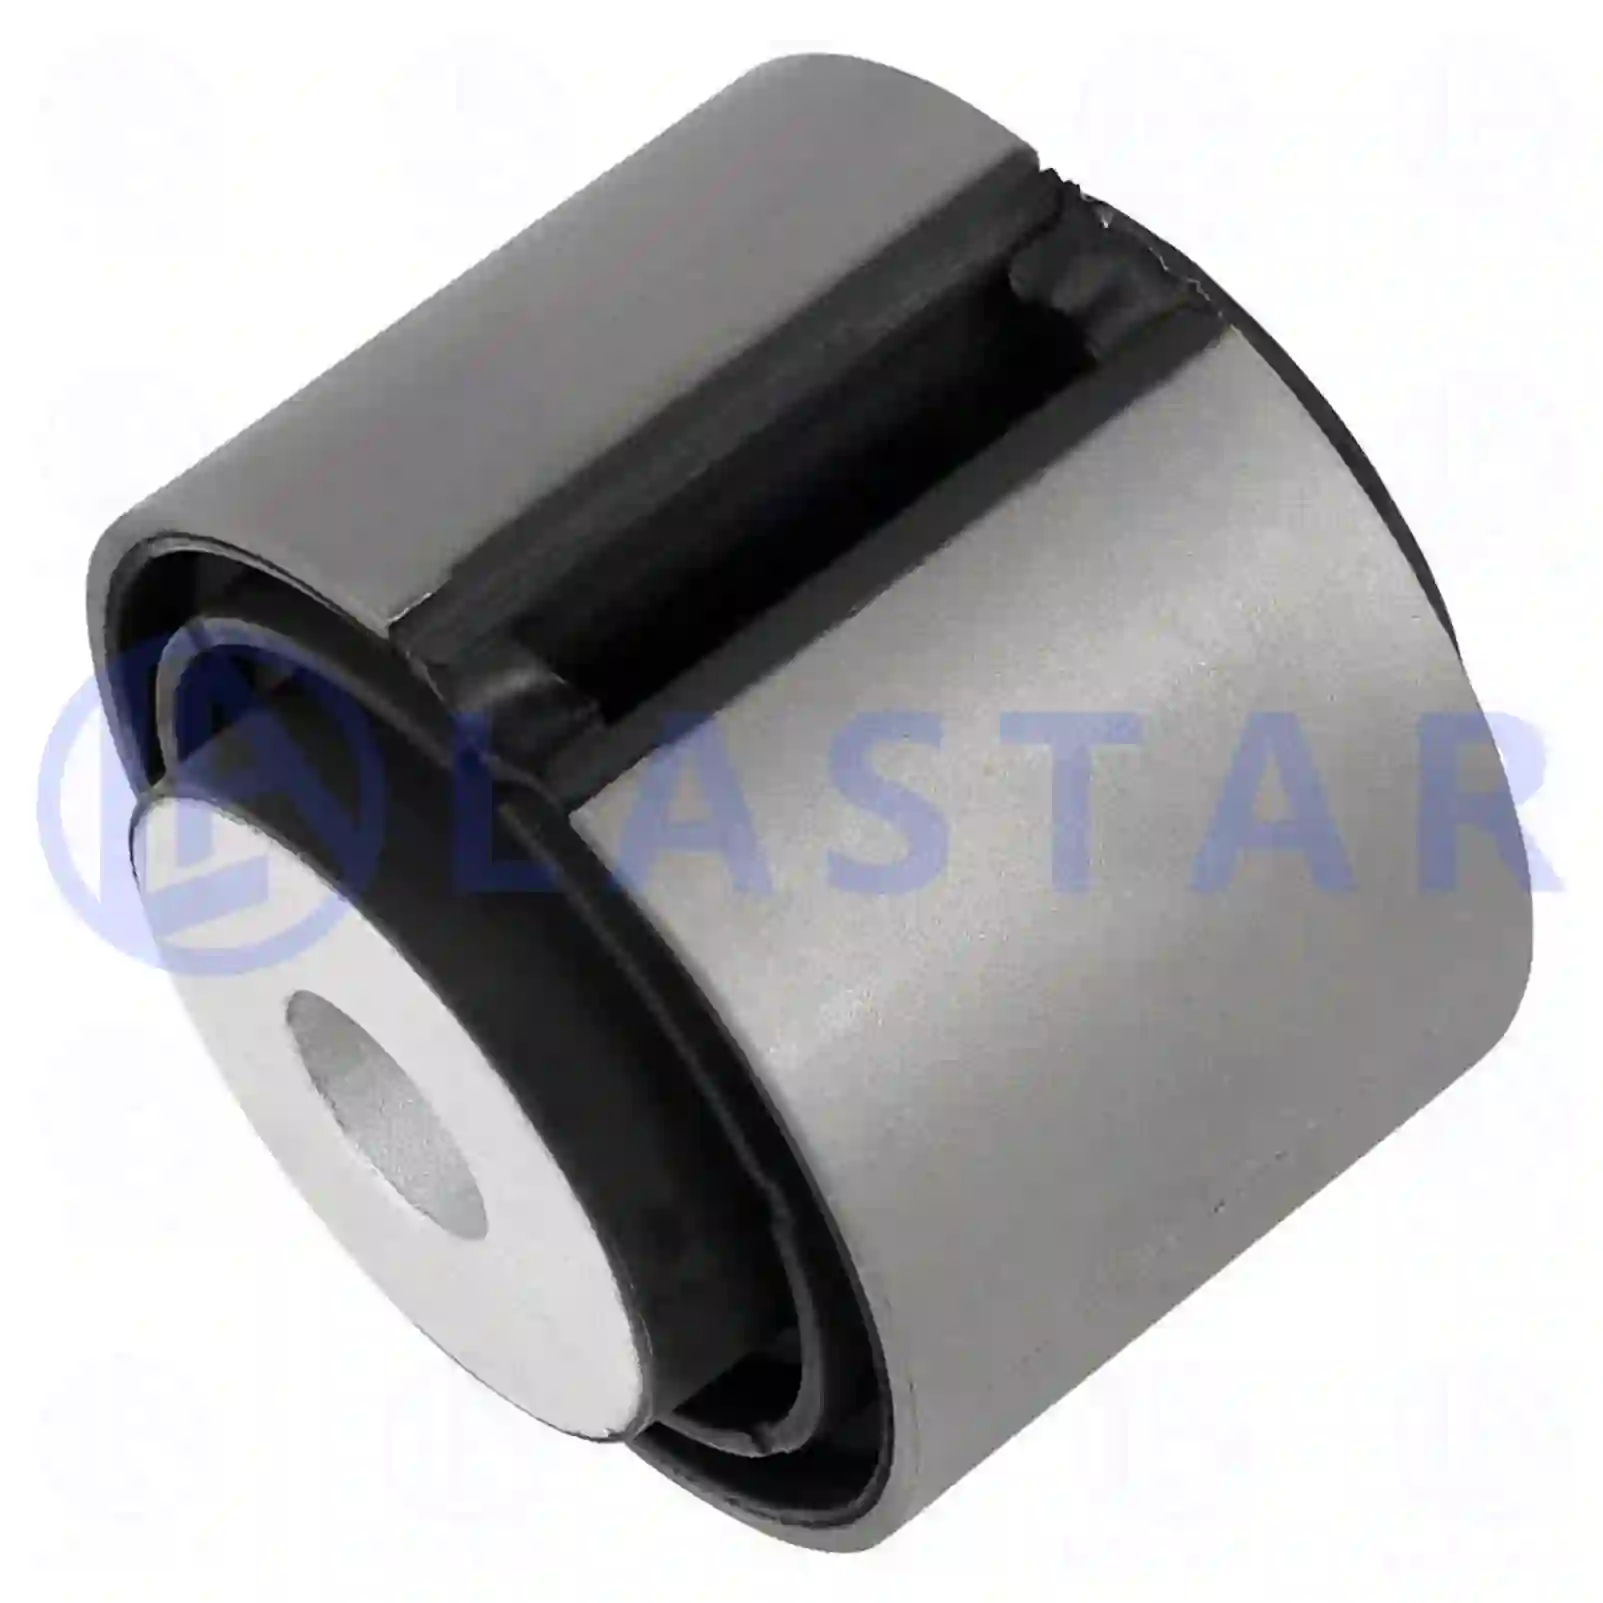 Bushing, stabilizer, 77728188, 6533260081, 6533260481, , ||  77728188 Lastar Spare Part | Truck Spare Parts, Auotomotive Spare Parts Bushing, stabilizer, 77728188, 6533260081, 6533260481, , ||  77728188 Lastar Spare Part | Truck Spare Parts, Auotomotive Spare Parts